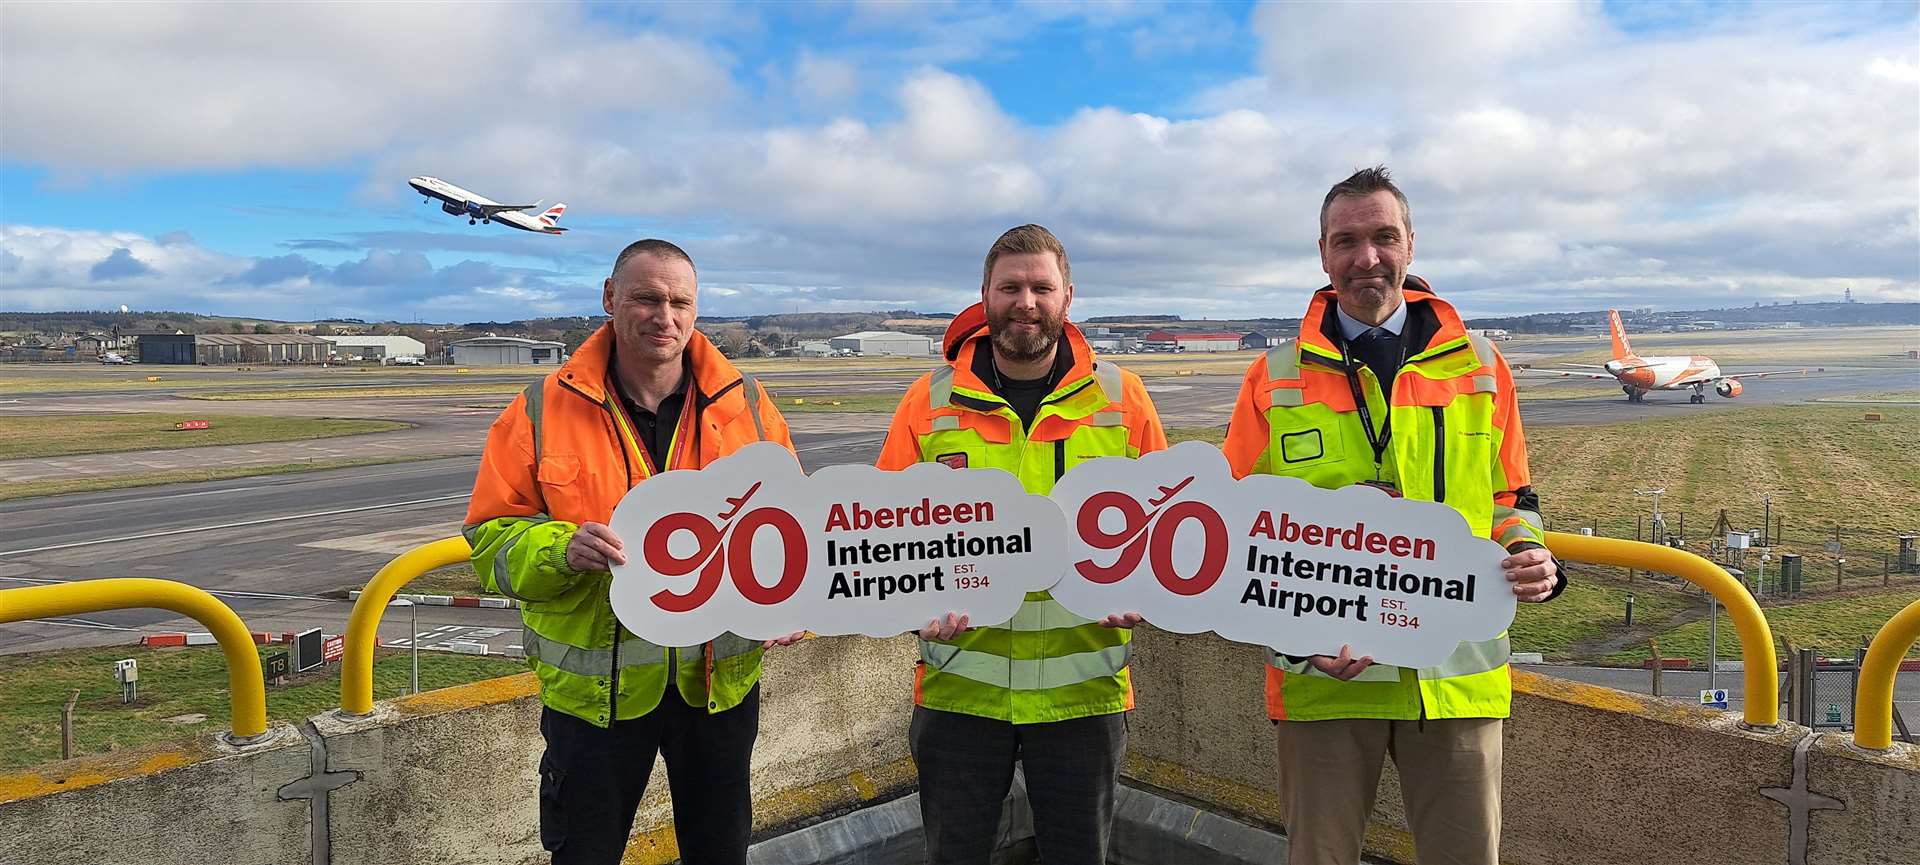 Aberdeen Airport turns 90 years old